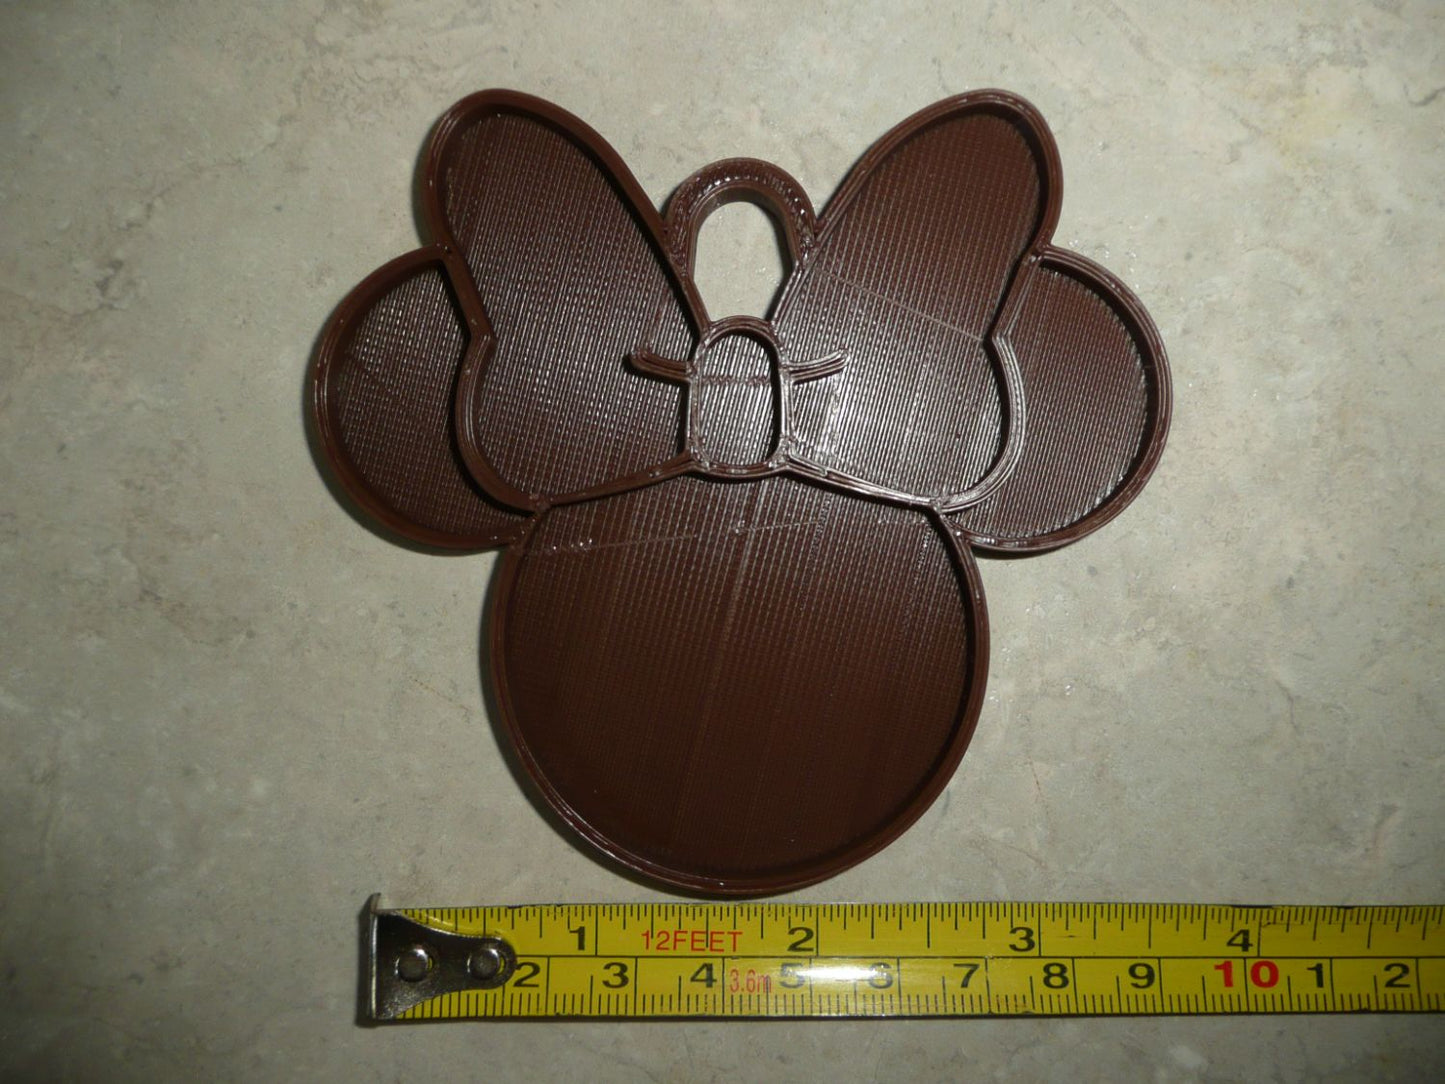 Minnie Mouse Face Ears Shape Brown Christmas Ornament Made in USA PR4876